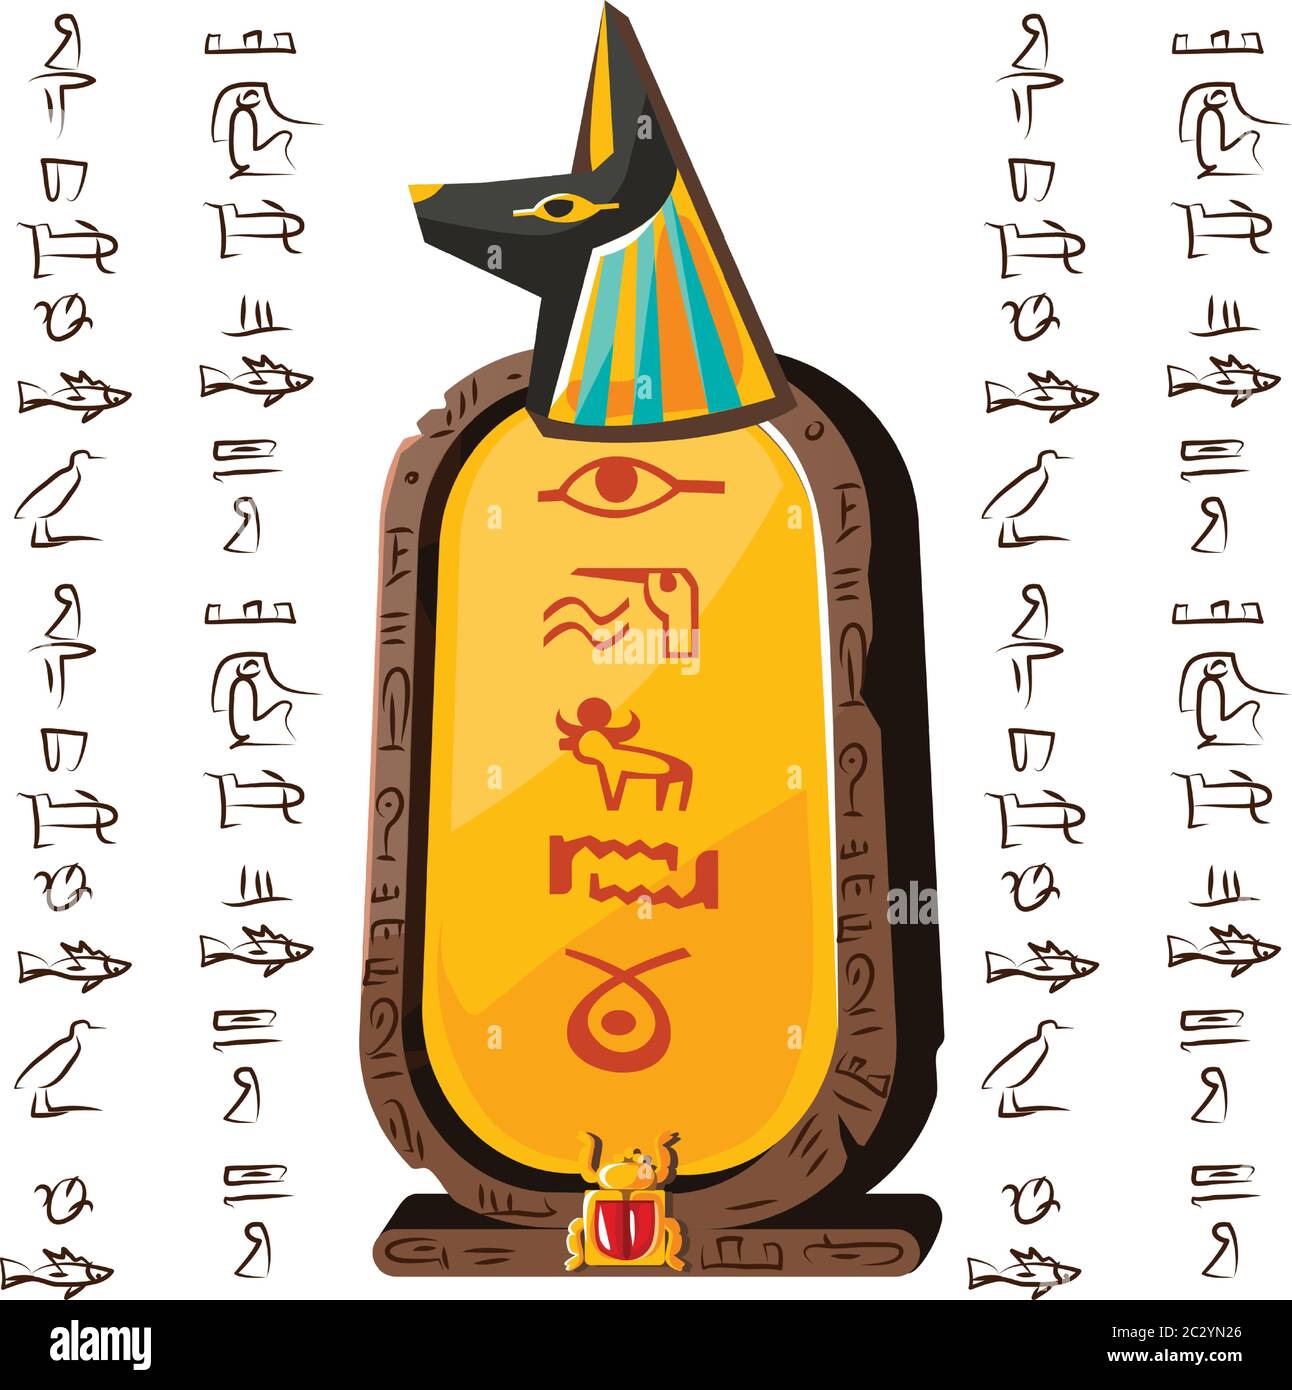 Stone board or clay tablet with anubis dog head and Egyptian hieroglyphs cartoon vector illustration Ancient object for recording storing information, Stock Vector